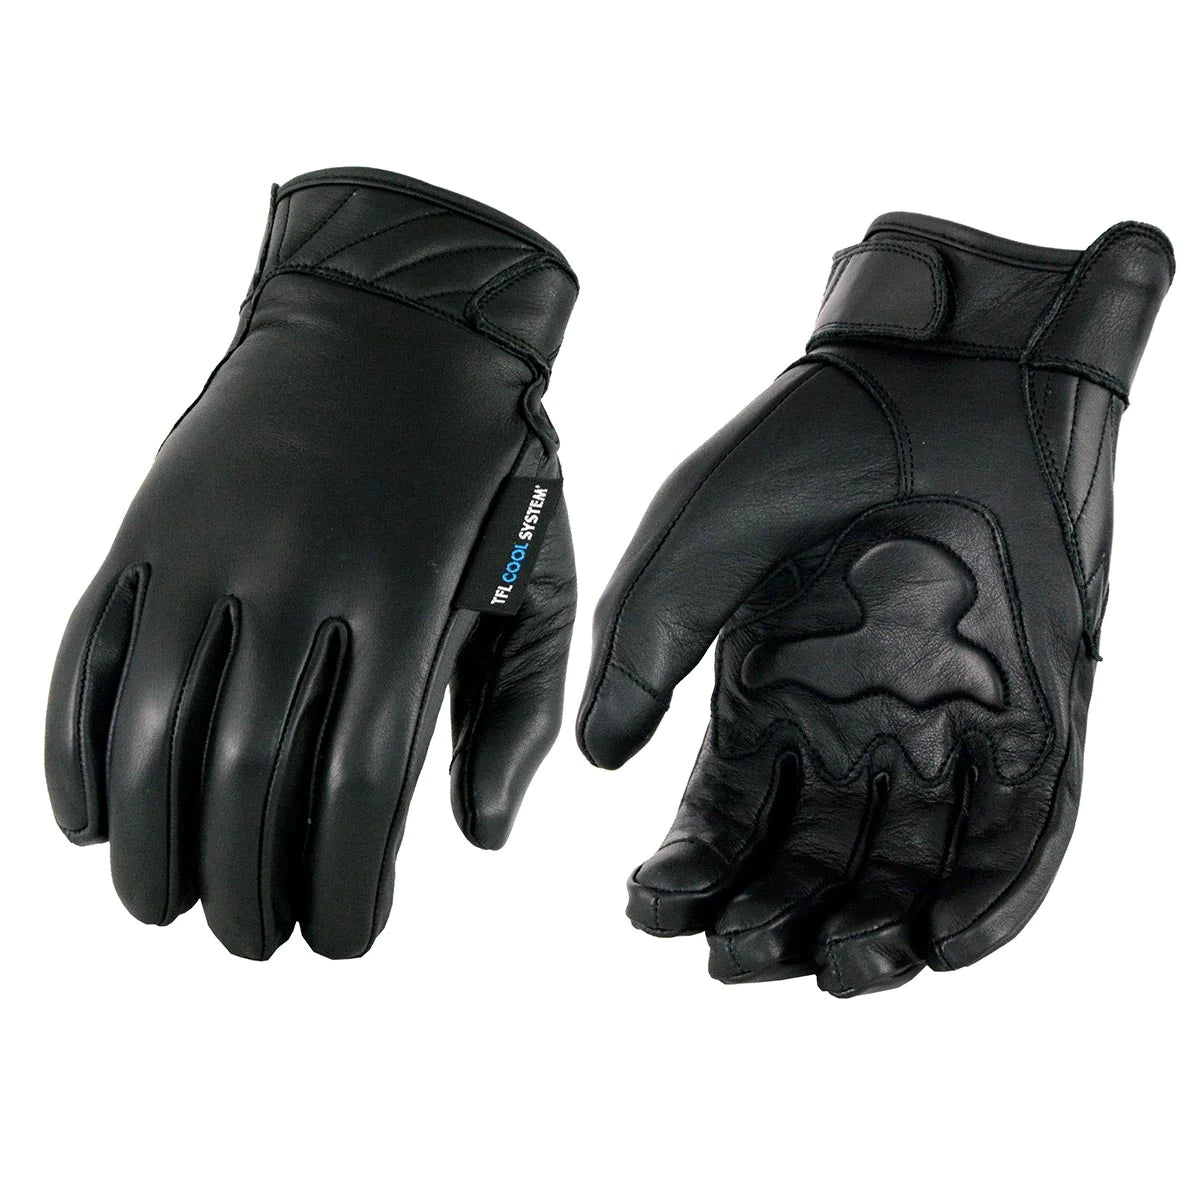 Men's Black Leather ‘Cool-Tec’ with i-Touch Screen Compatible Gel Palm Motorcycle Hand Gloves